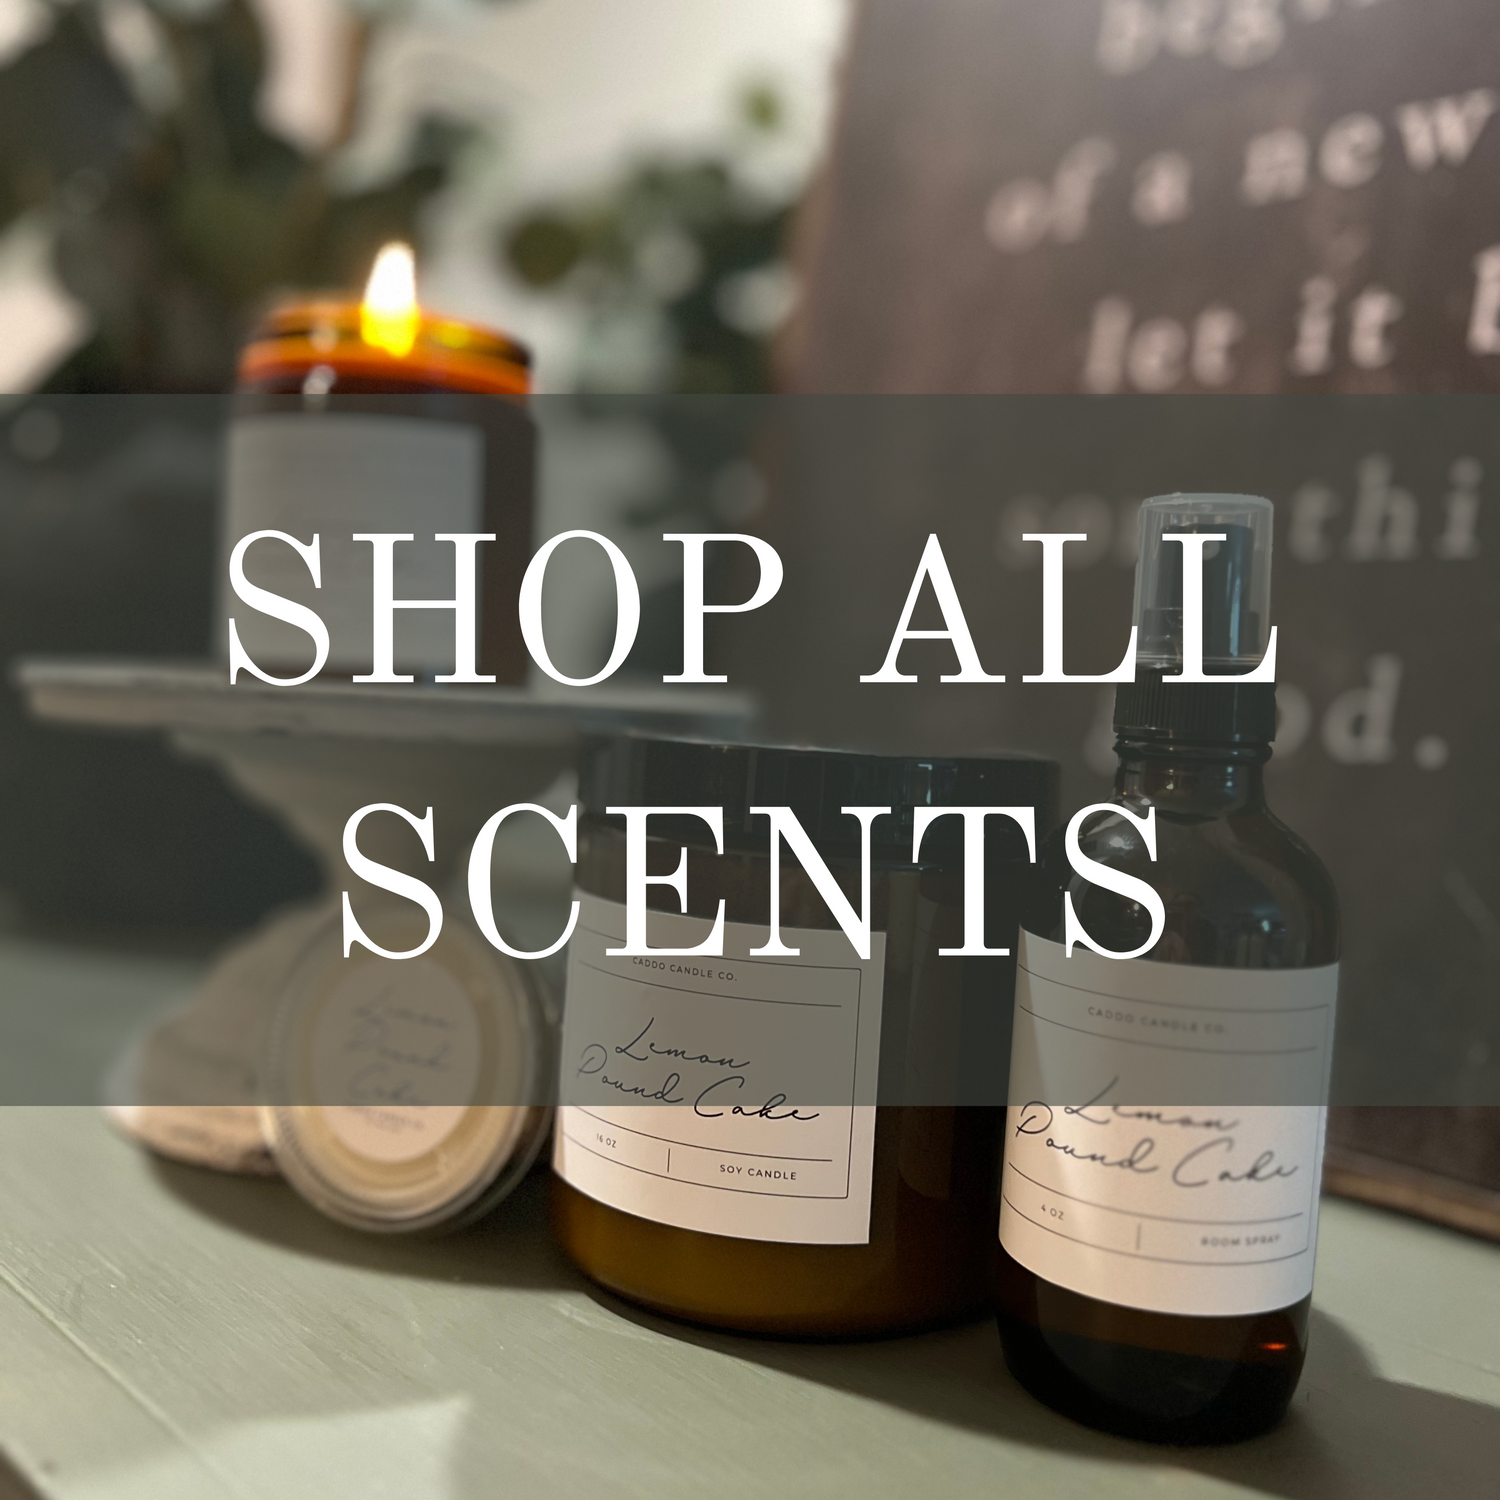 All Scents